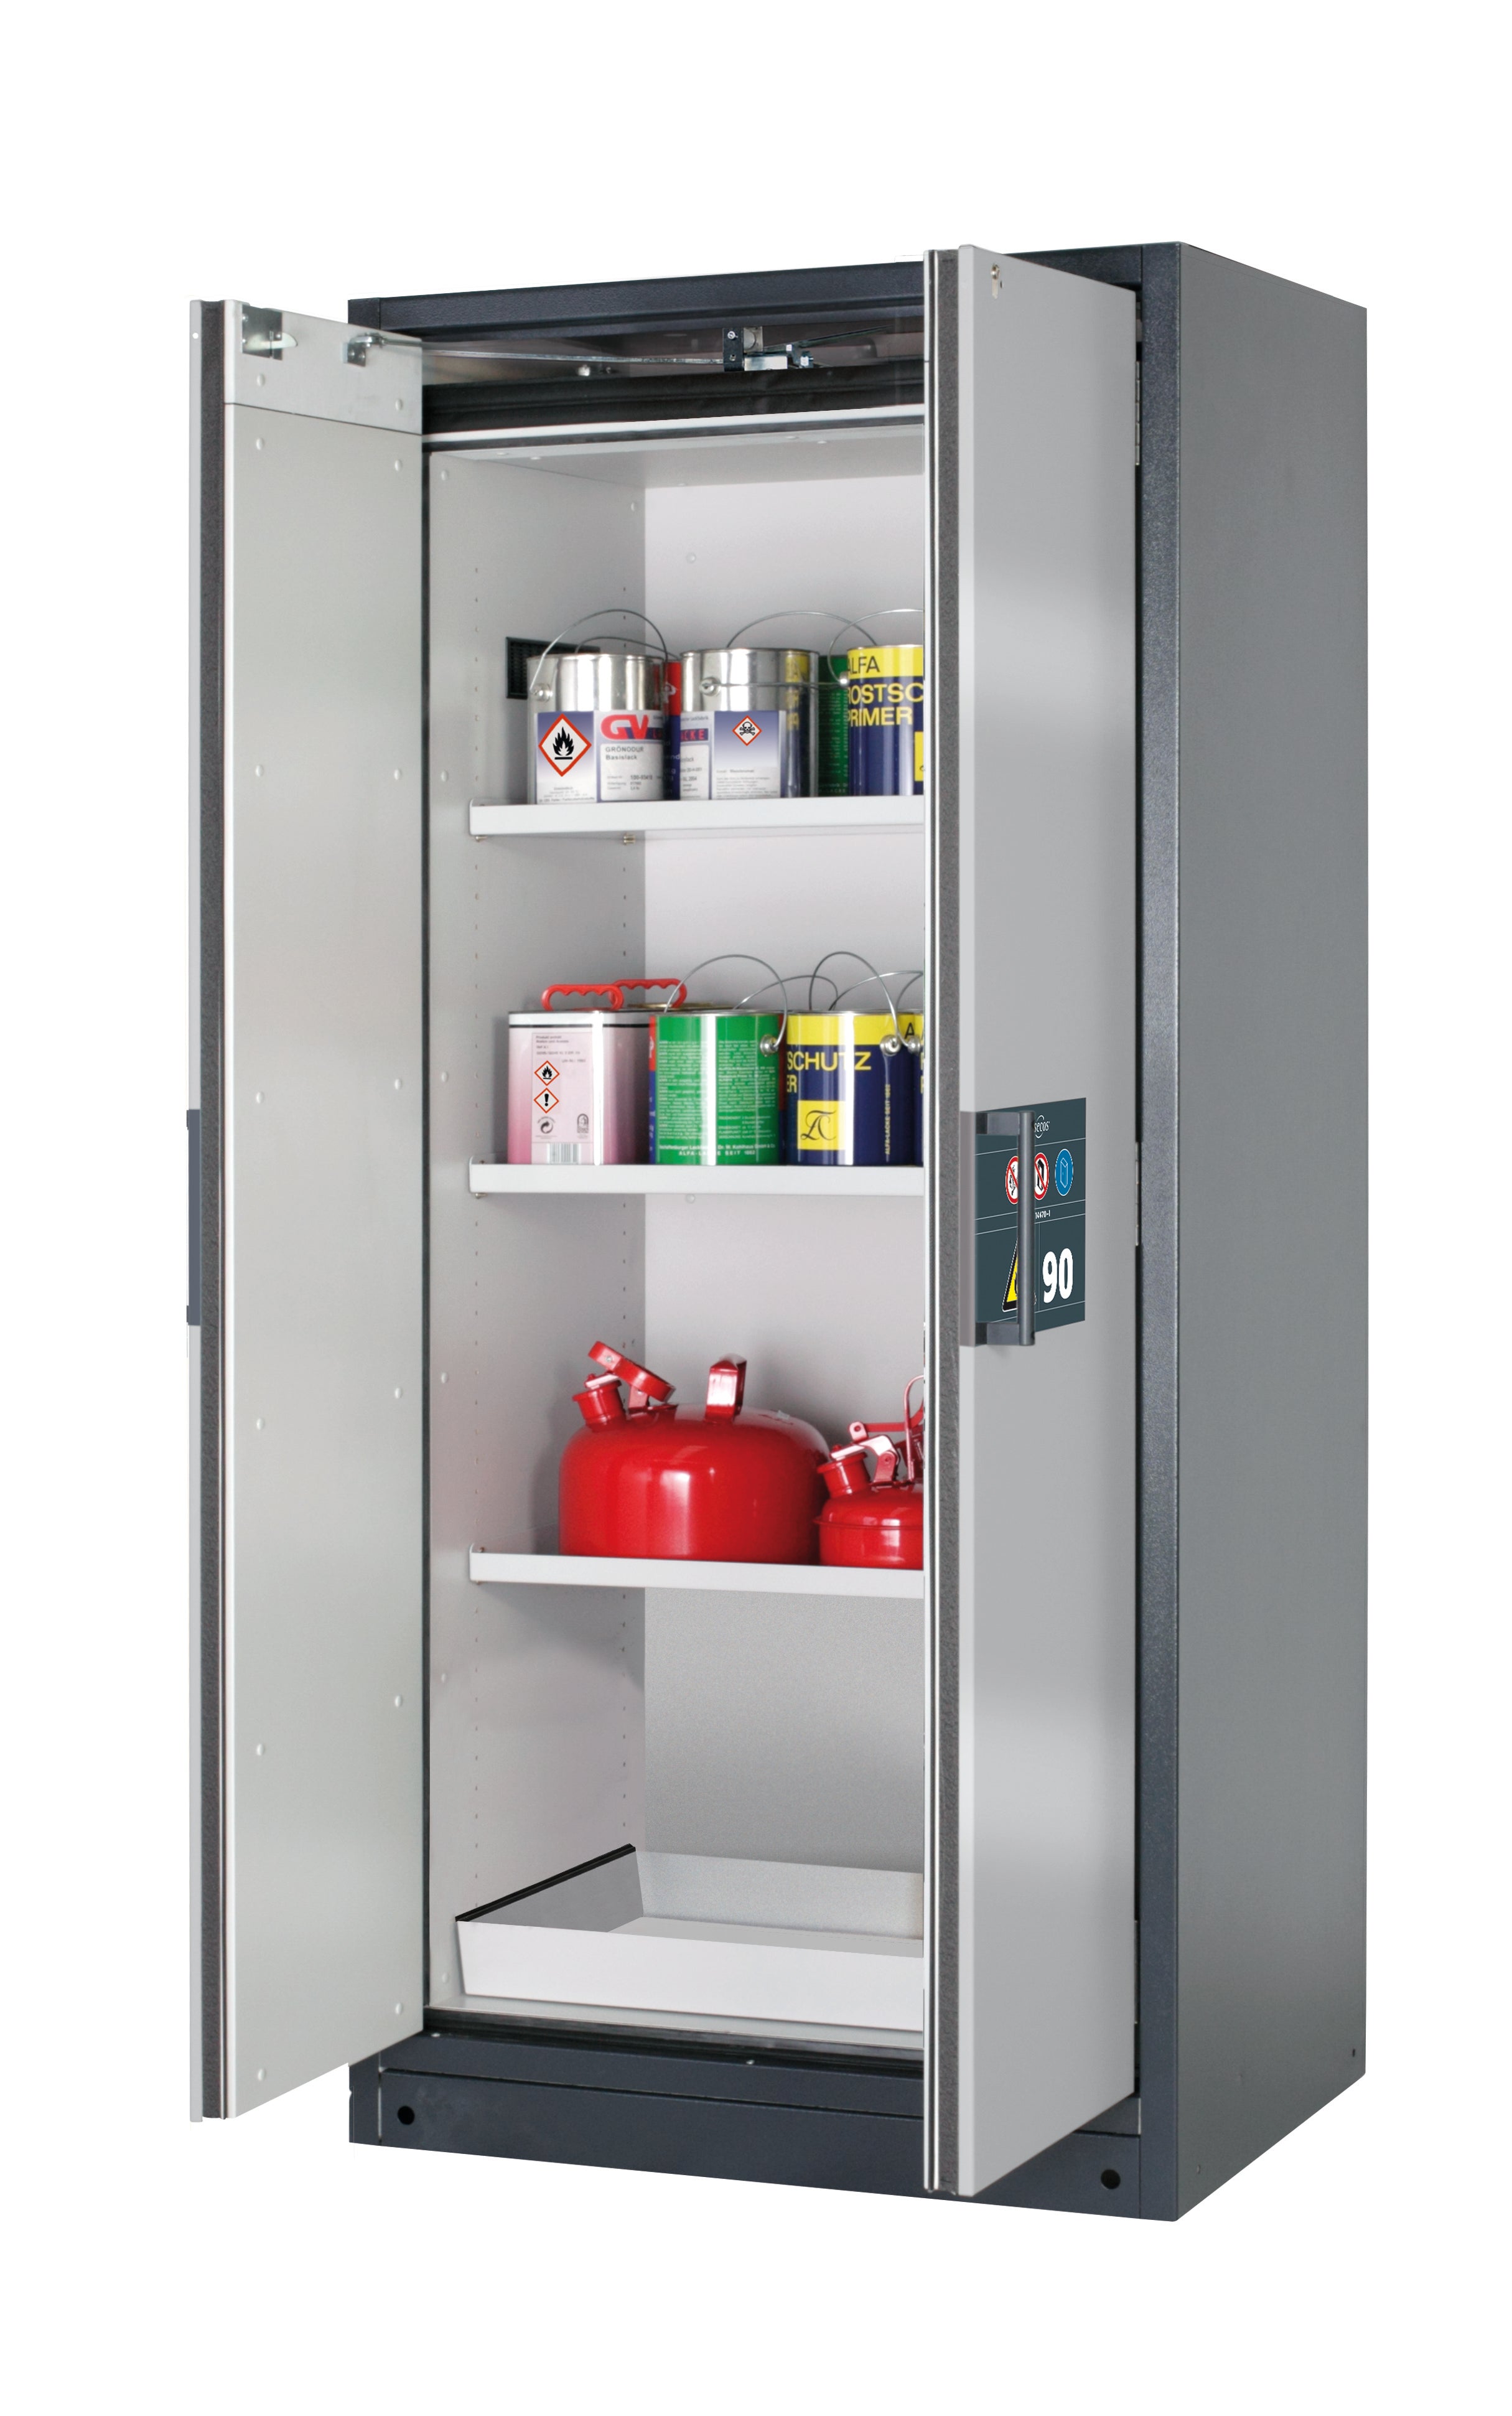 Type 90 safety storage cabinet Q-PEGASUS-90 model Q90.195.090.WDAC in asecos silver with 3x shelf standard (sheet steel),